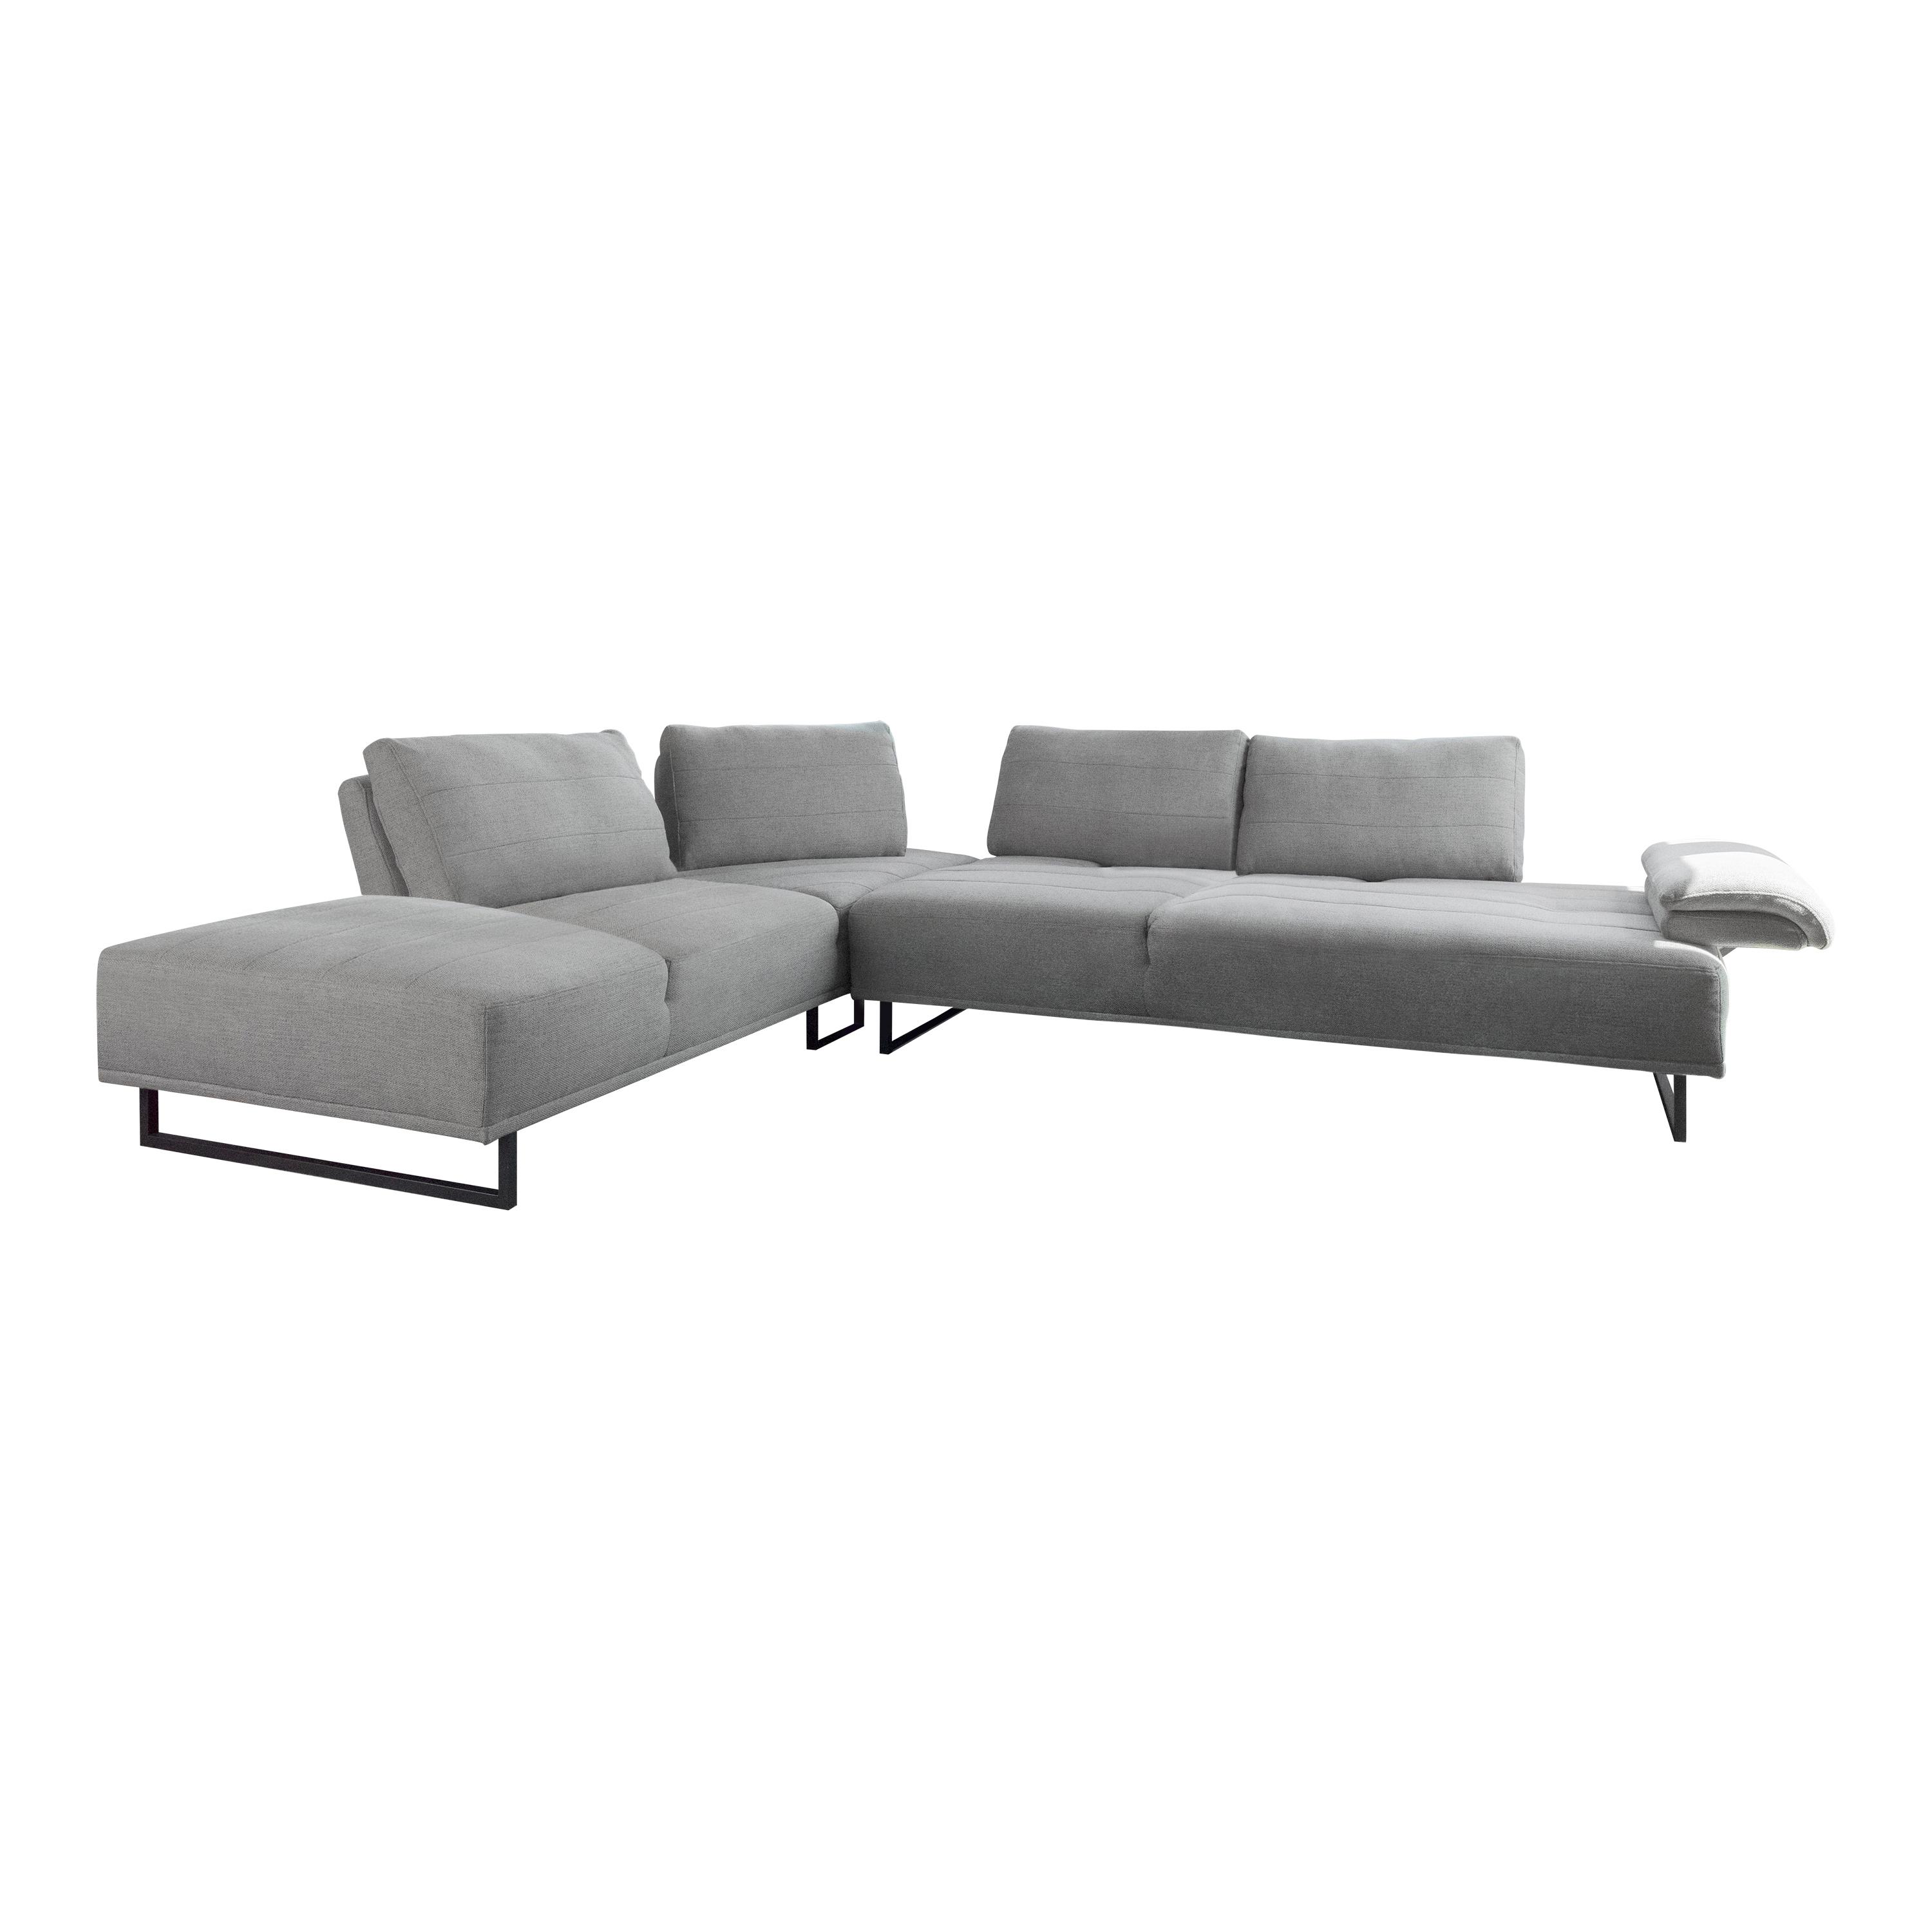 Contemporary Sectional 508888 Arden 508888 in Taupe 